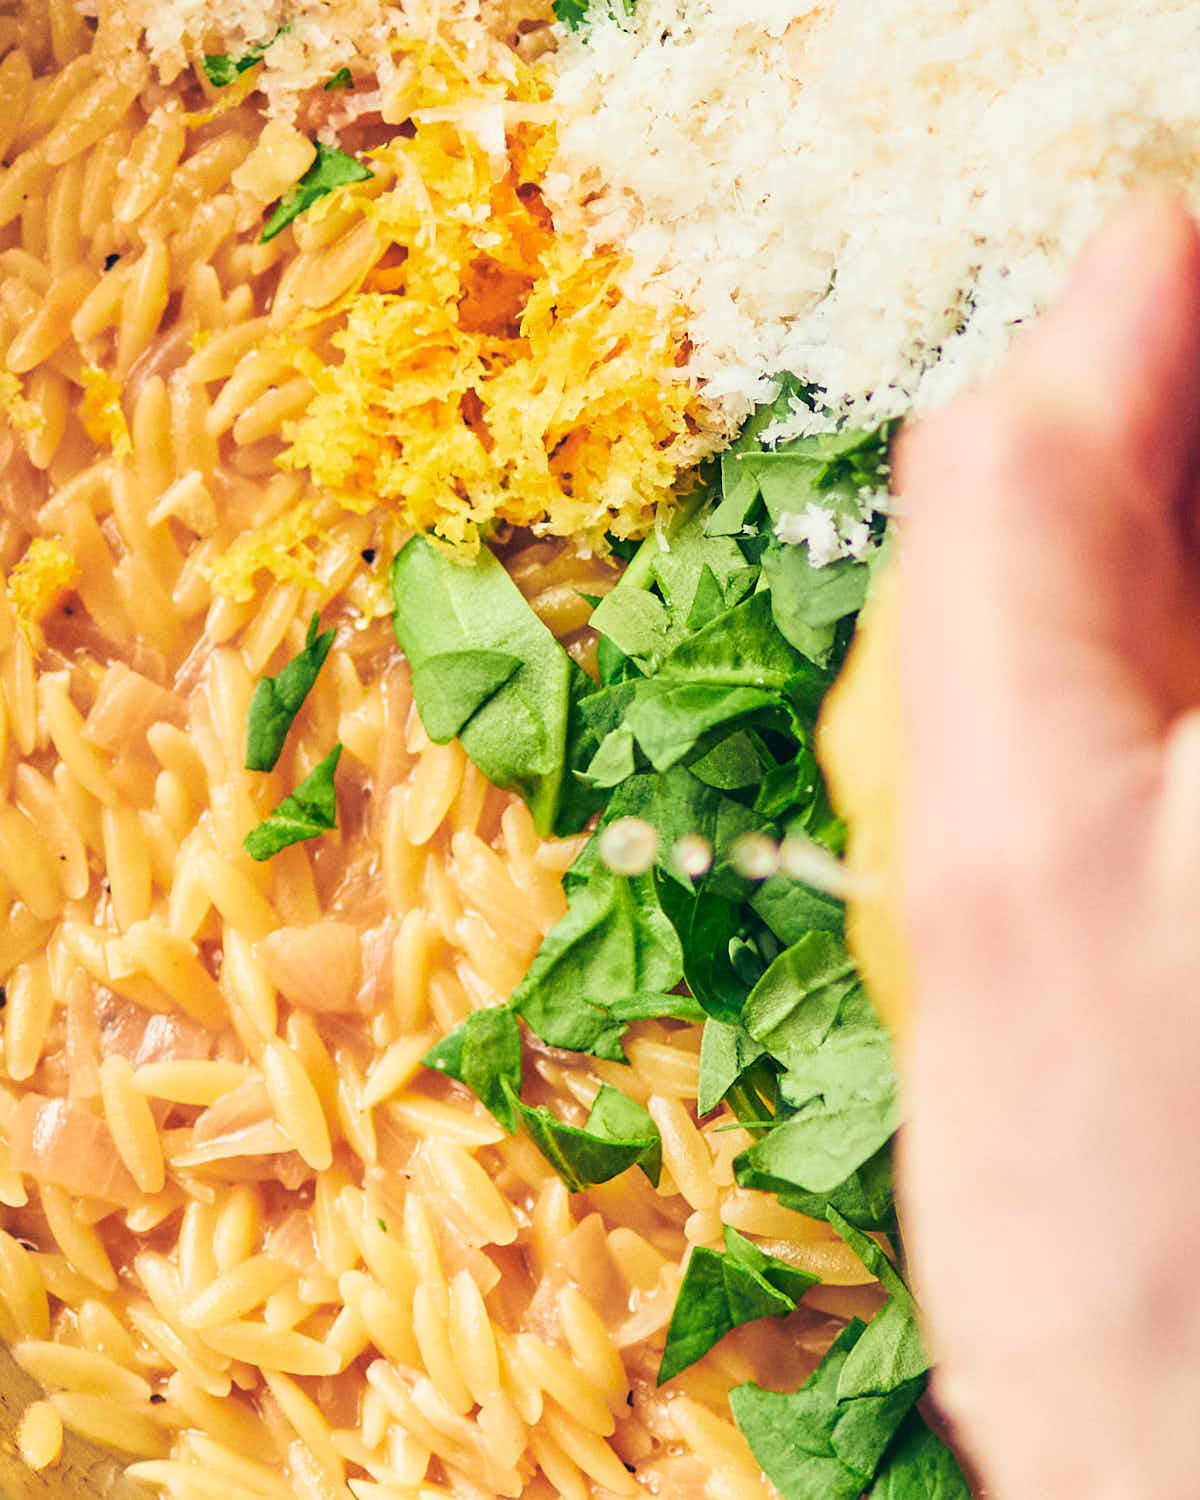 Orzo cooked al dente, being topped with lemon zest, parmesan, spinach and fresh lemon juice.